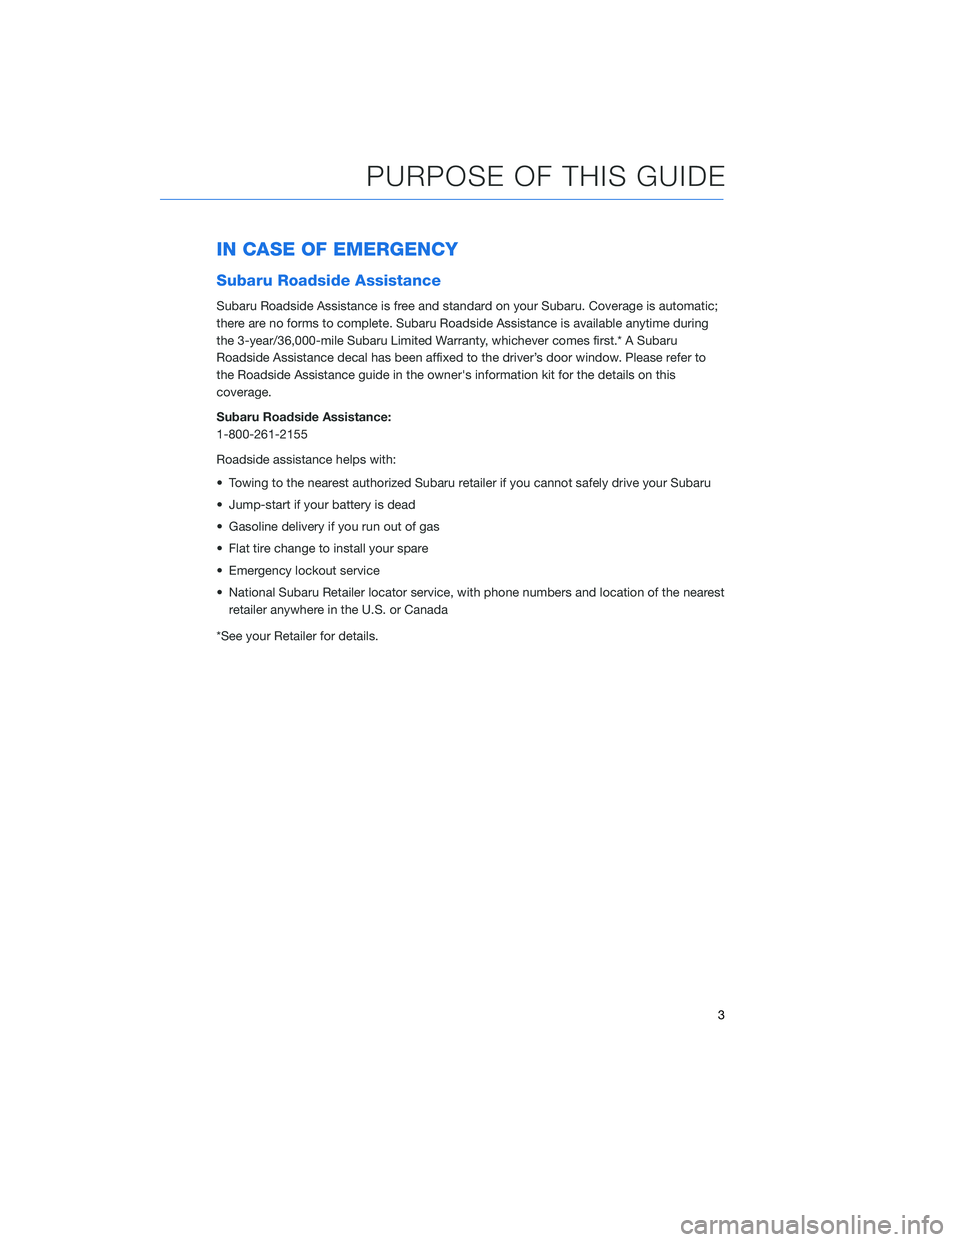 SUBARU BRZ 2020  Quick Guide IN CASE OF EMERGENCY
Subaru Roadside Assistance
Subaru Roadside Assistance is free and standard on your Subaru. Coverage is automatic;
there are no forms to complete. Subaru Roadside Assistance is ava